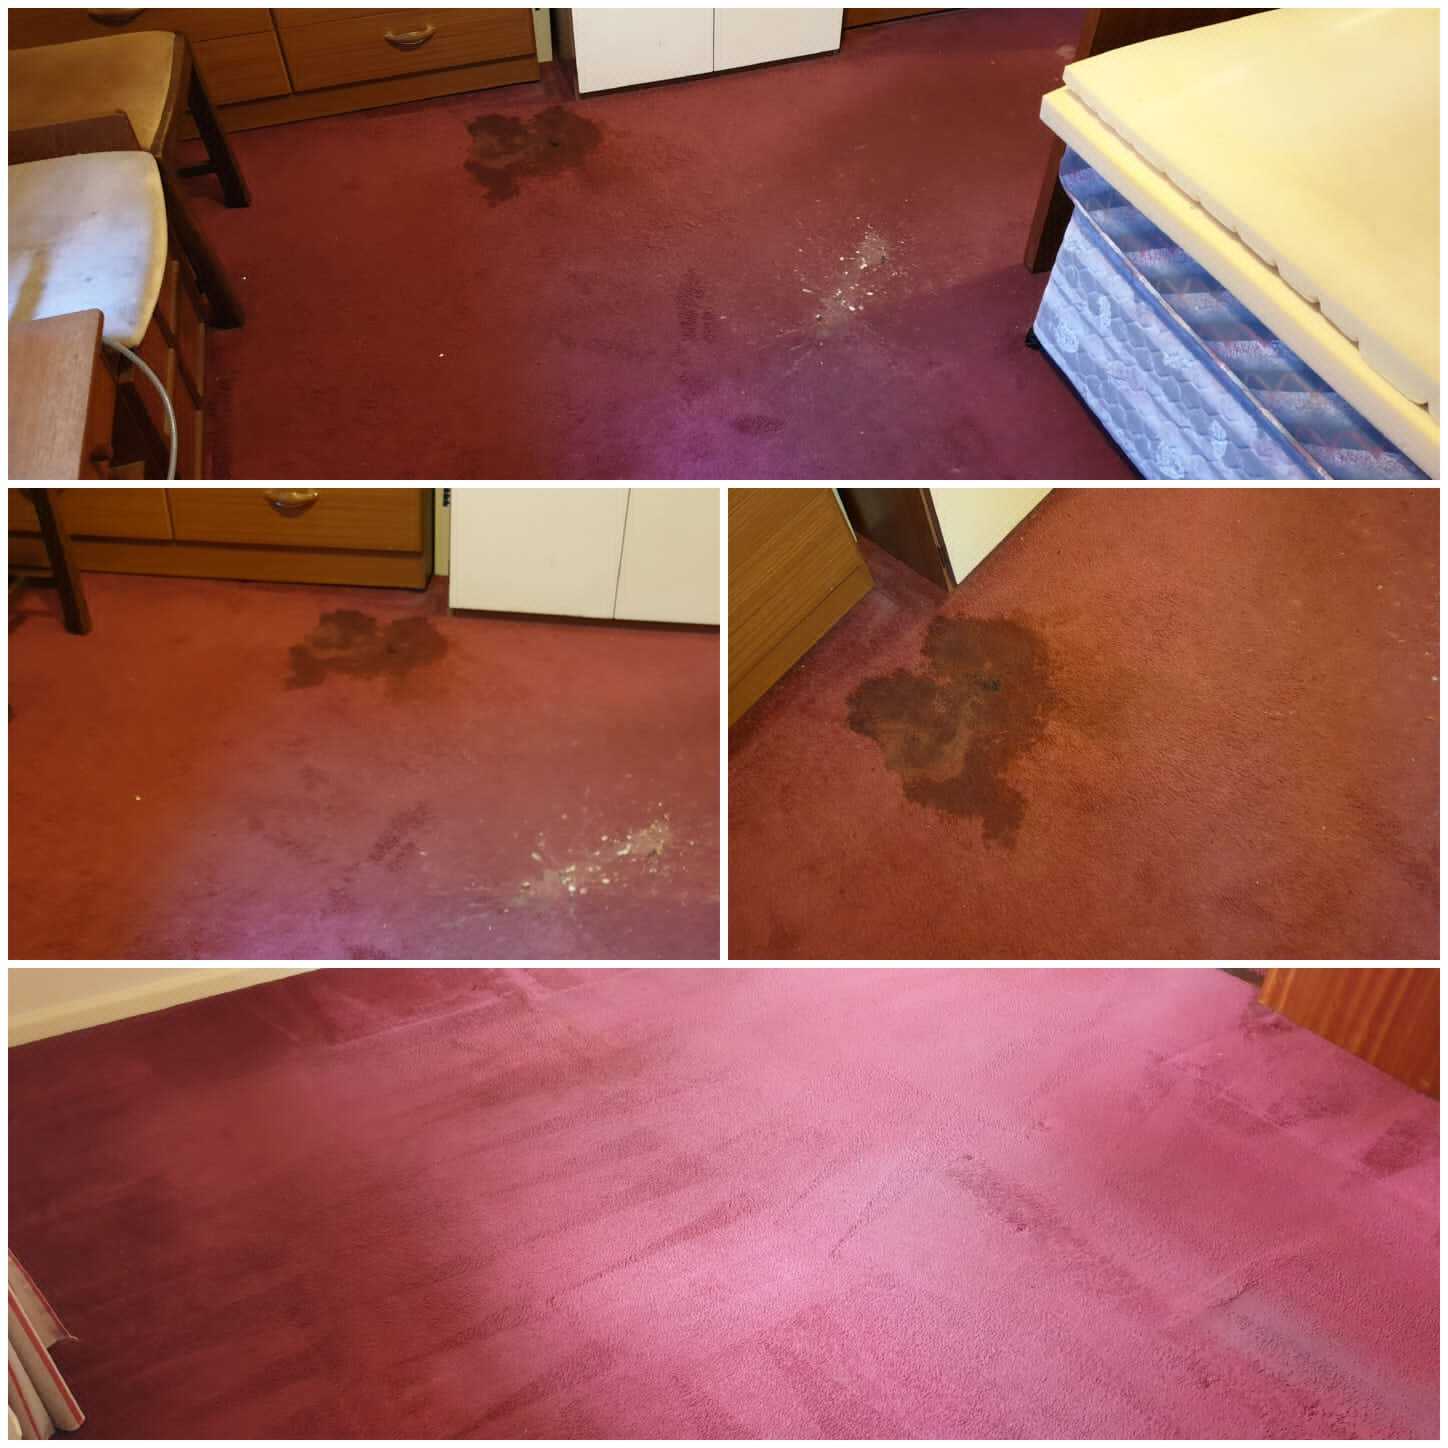 Carpet before and after cleaning